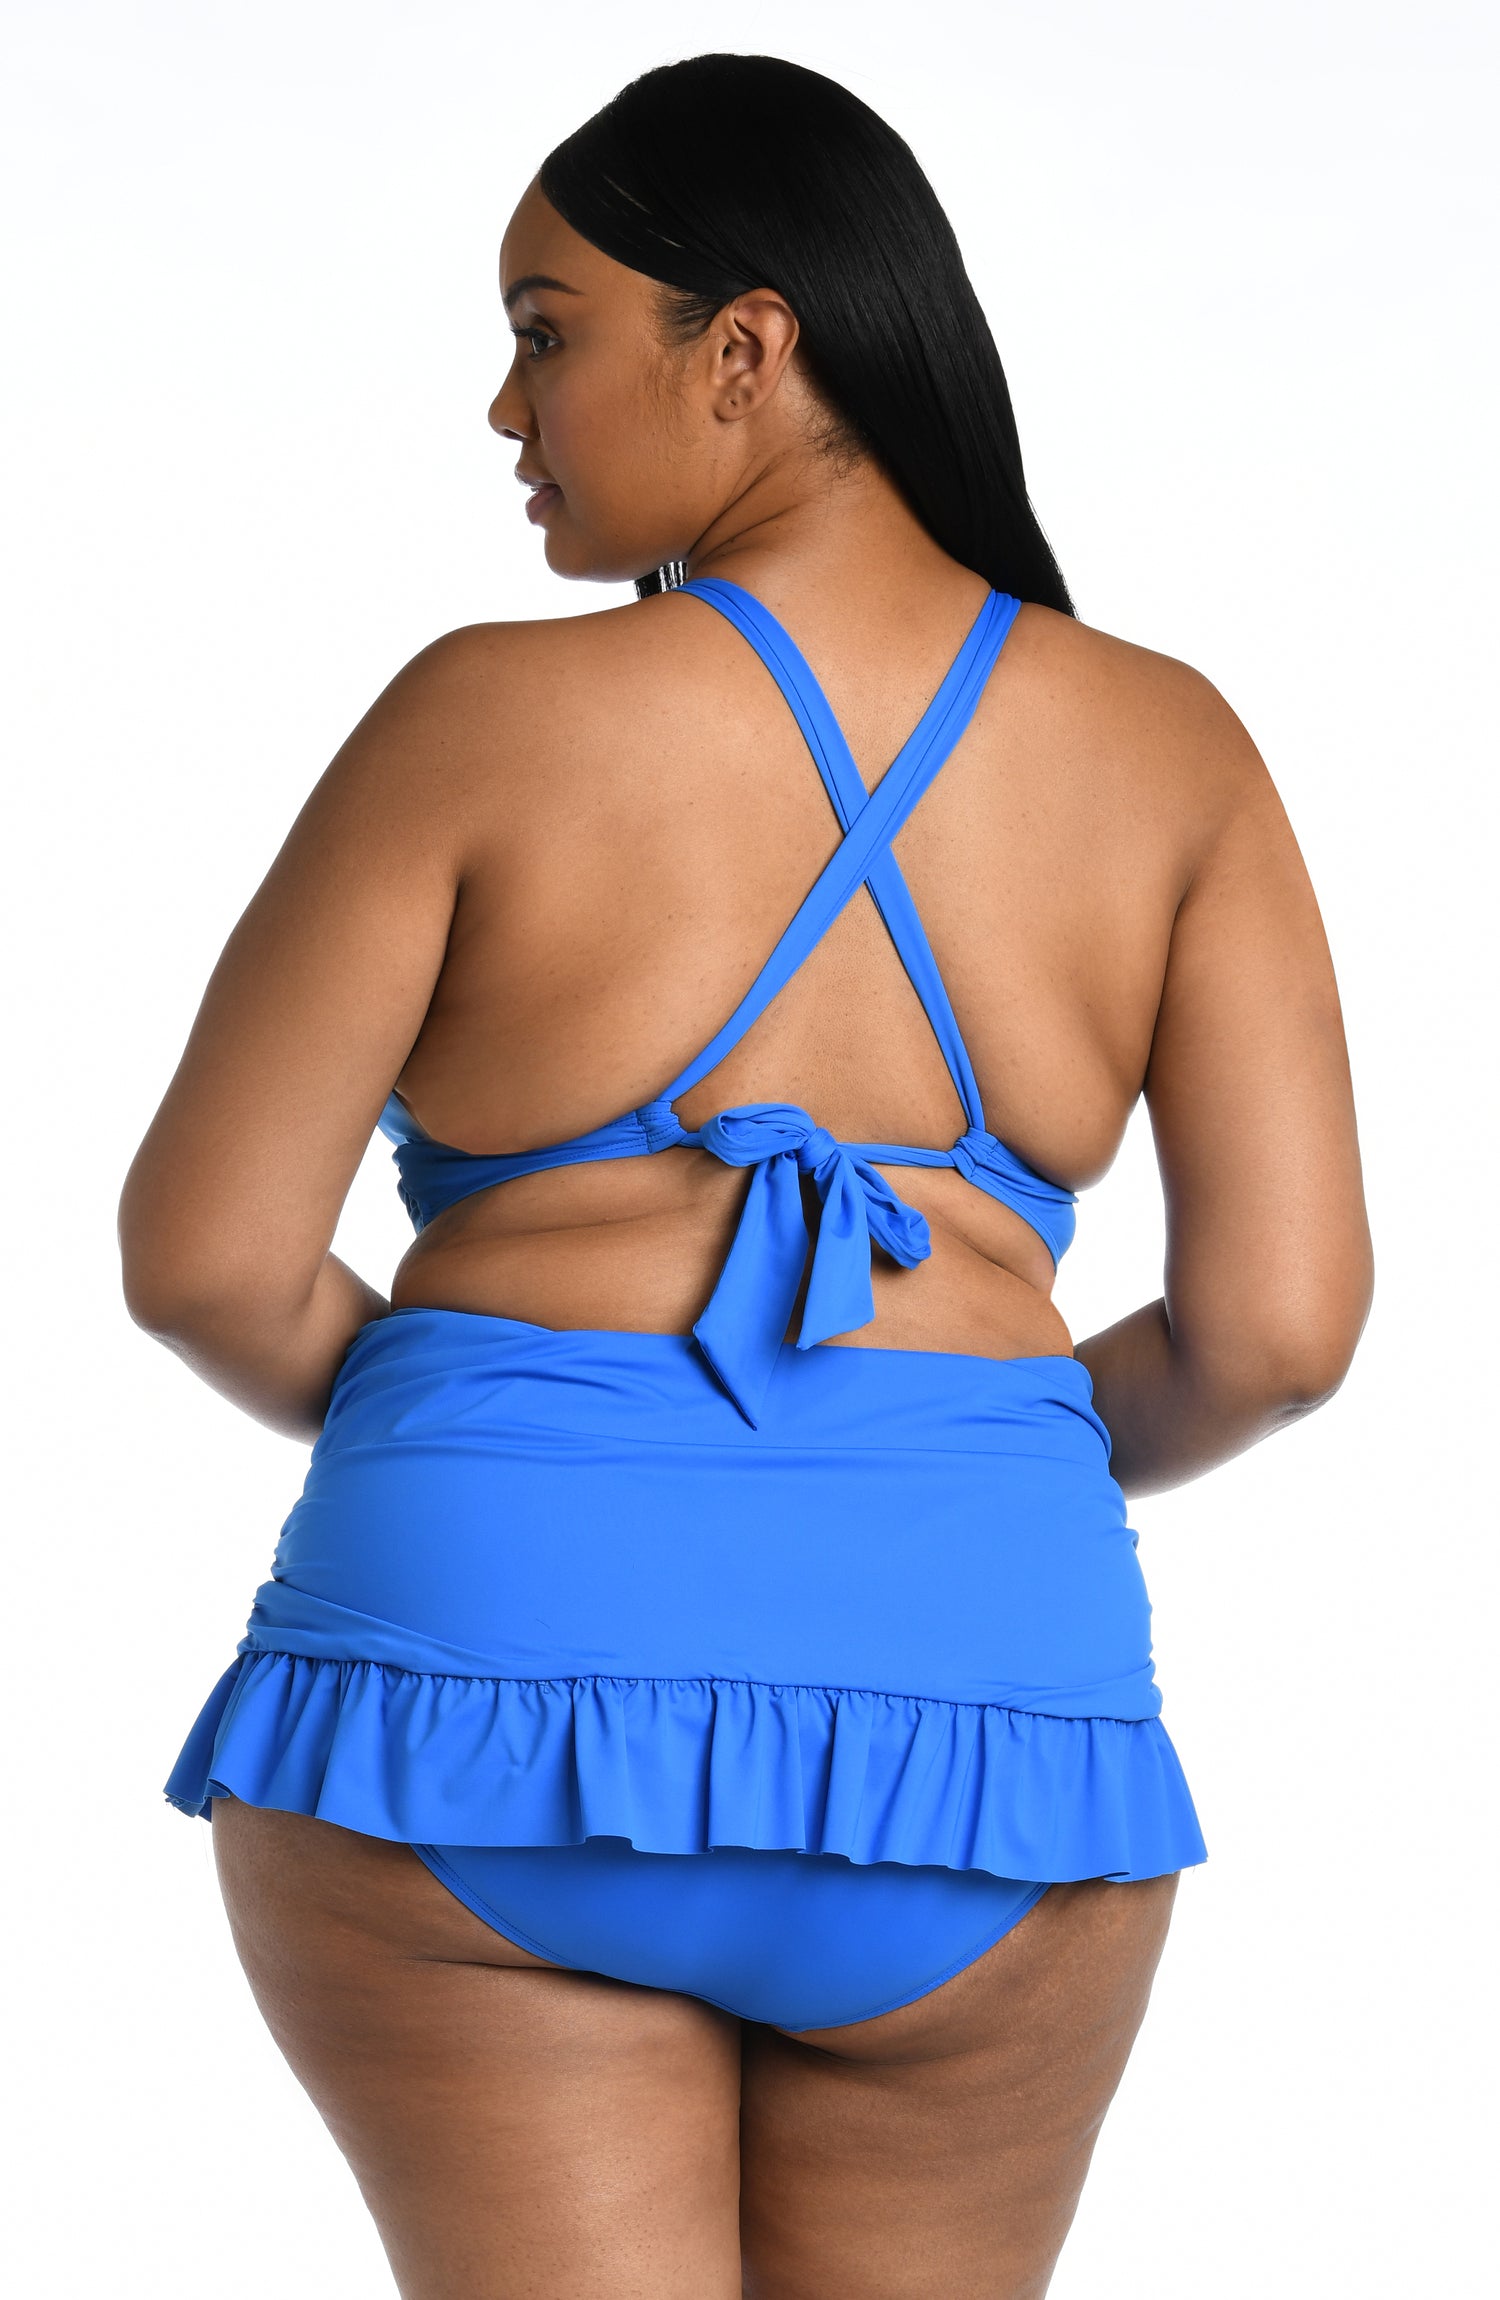 Model is wearing a capri blue colored midkini swimsuit top from our Best-Selling Island Goddess collection.